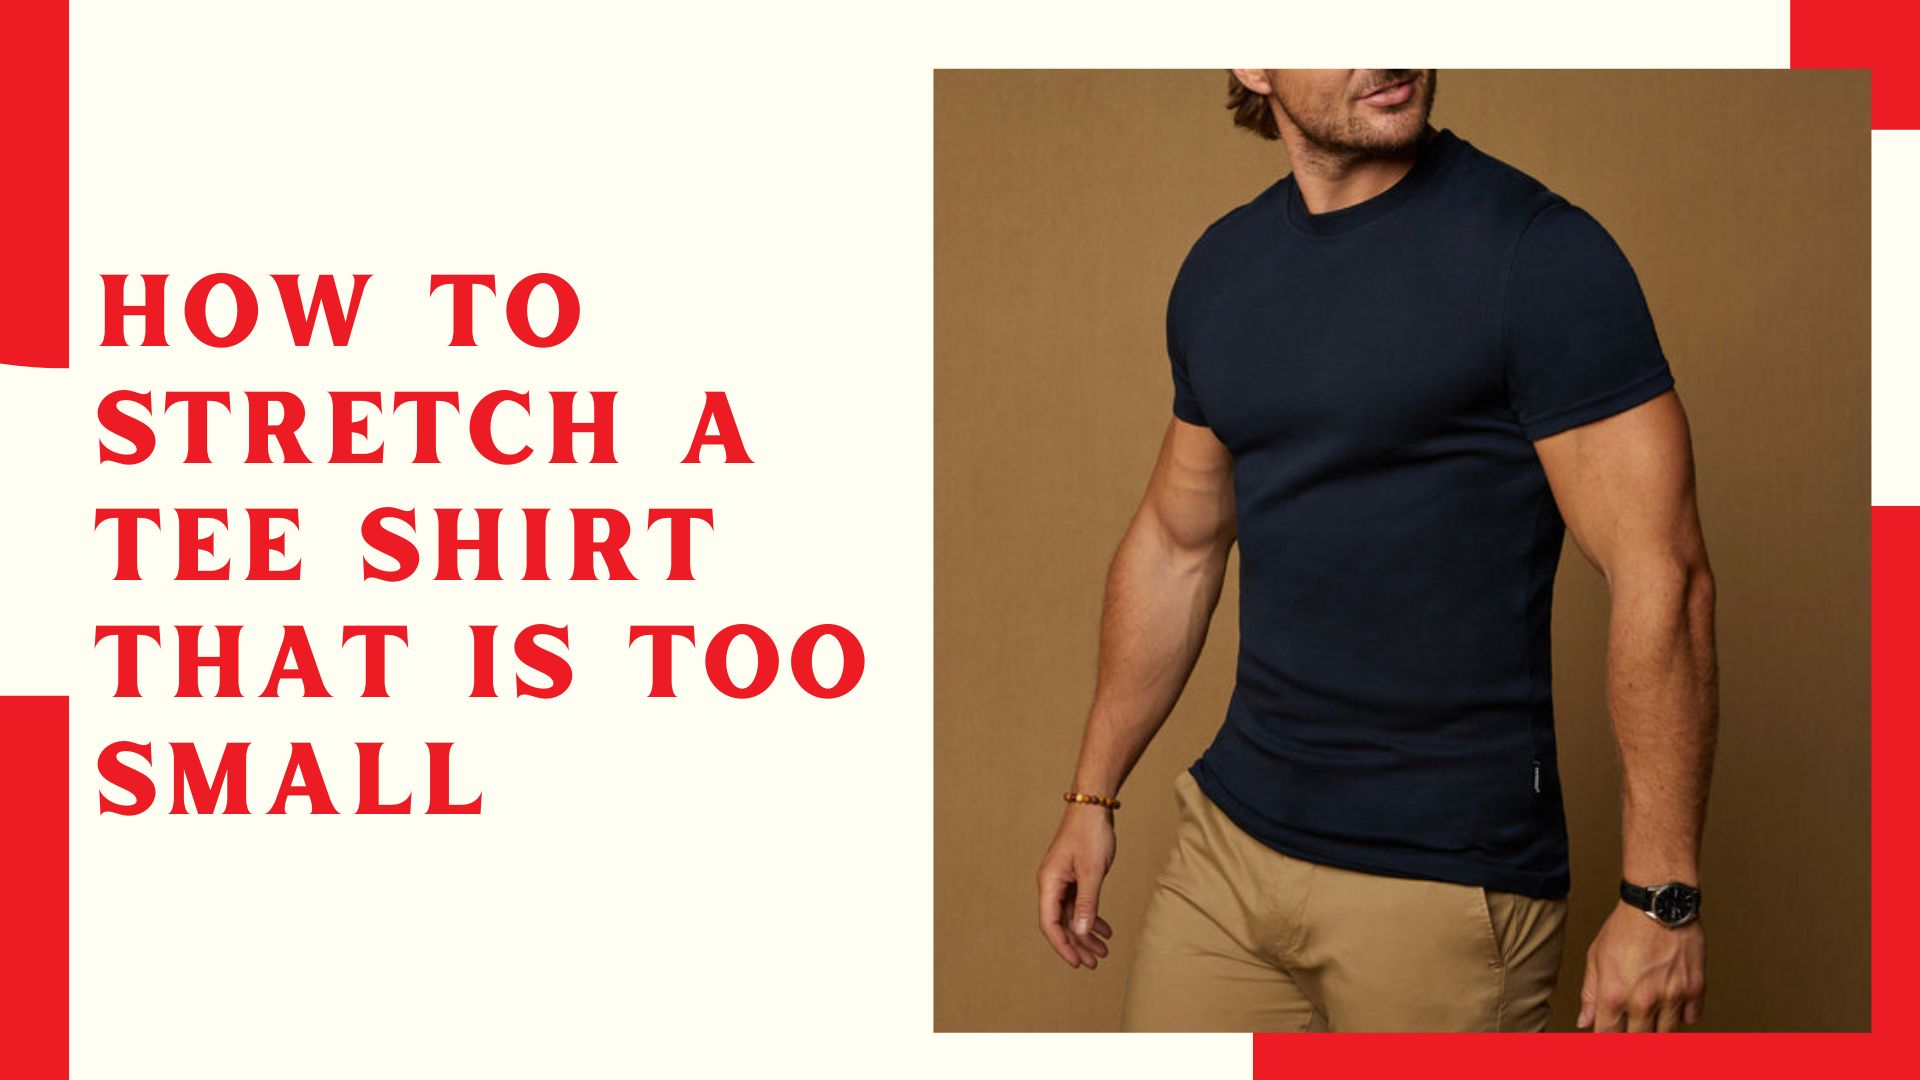 How To Stretch A Tee Shirt That Is Too Small